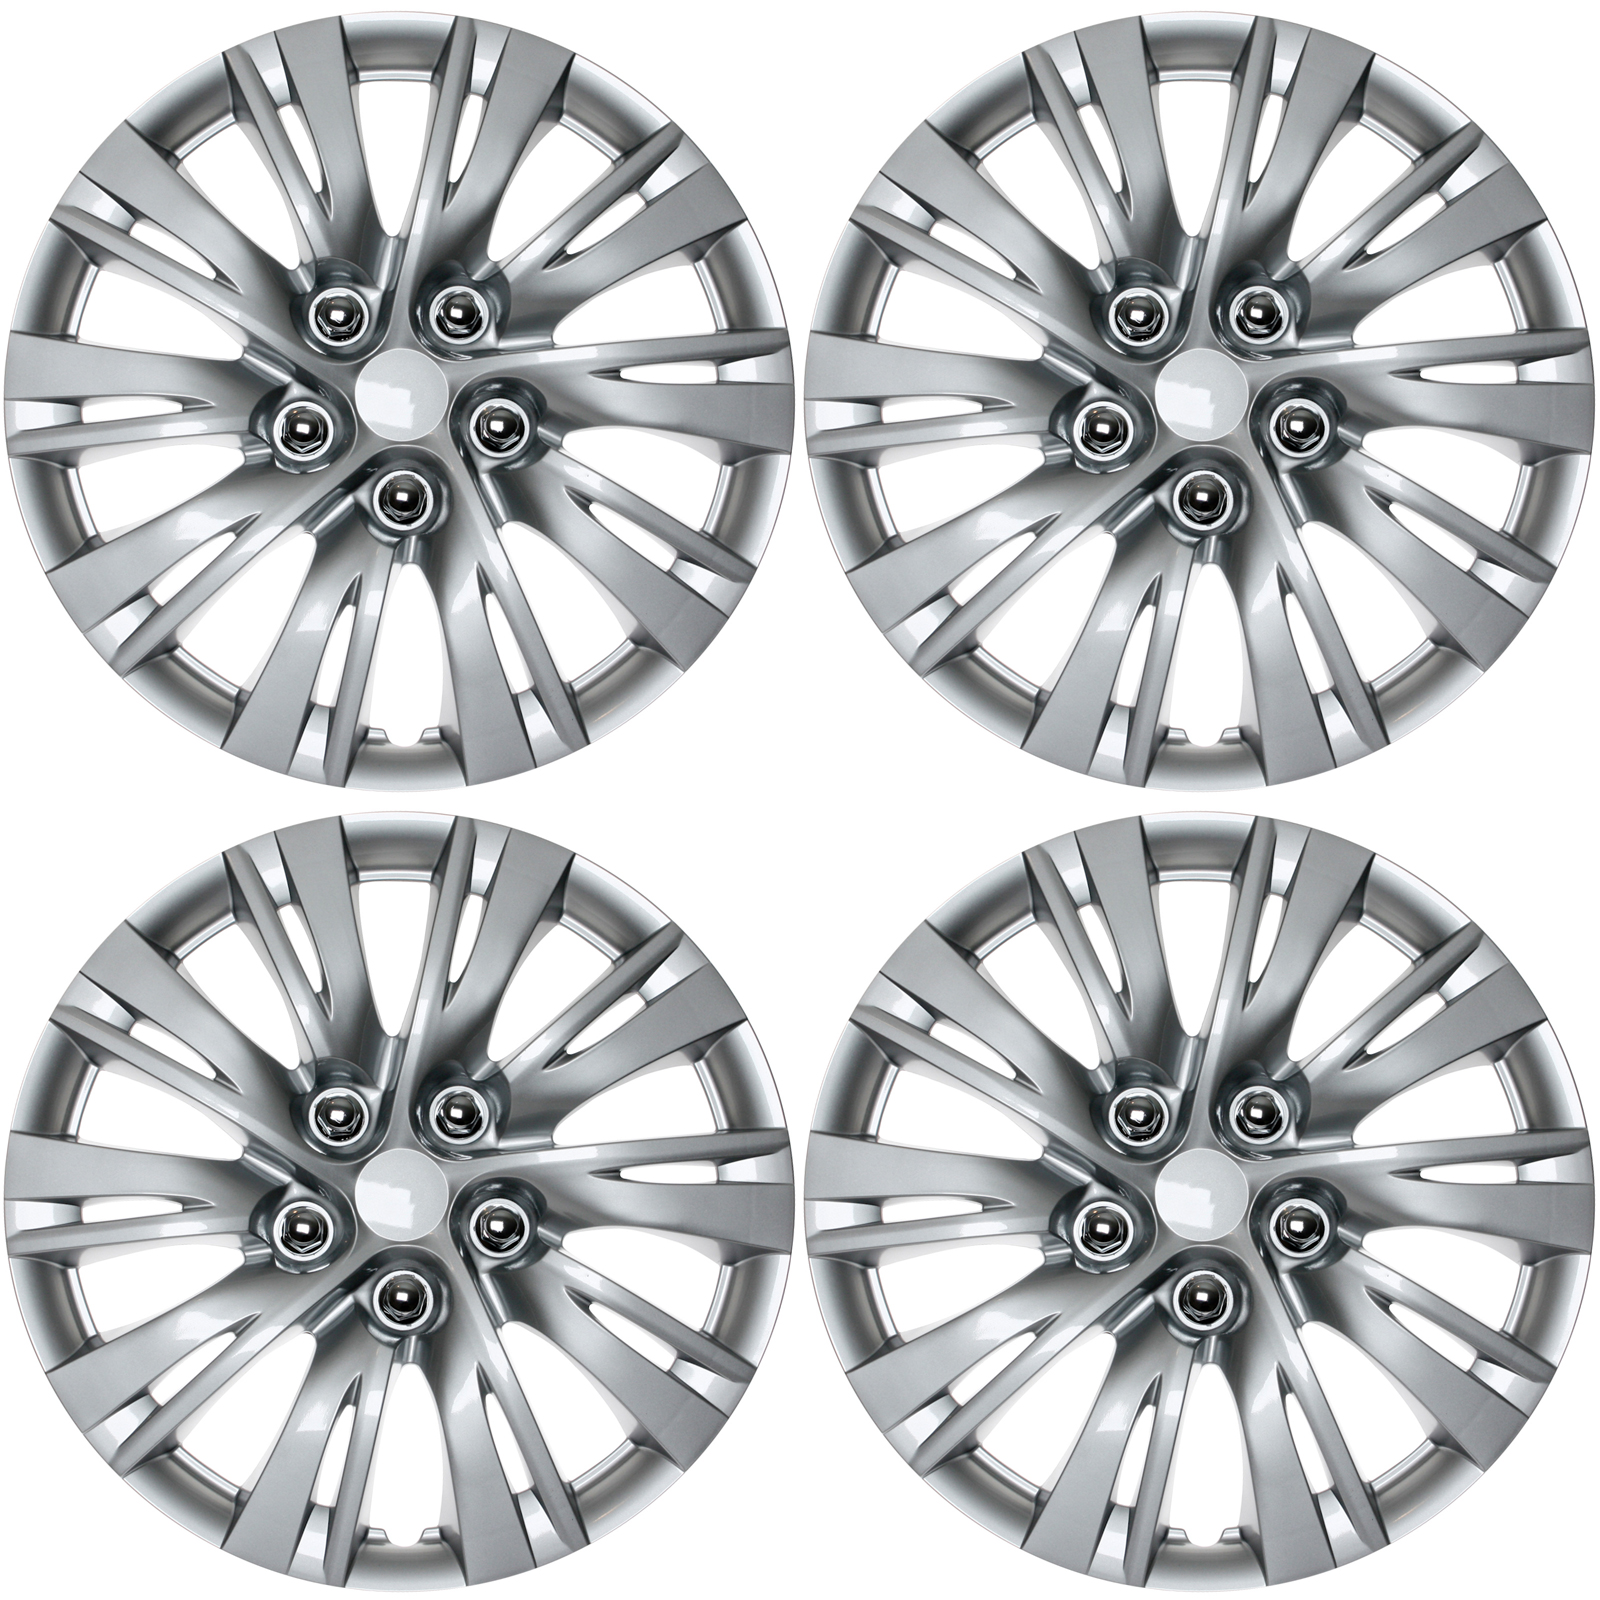 16 inch black and chrome hubcaps